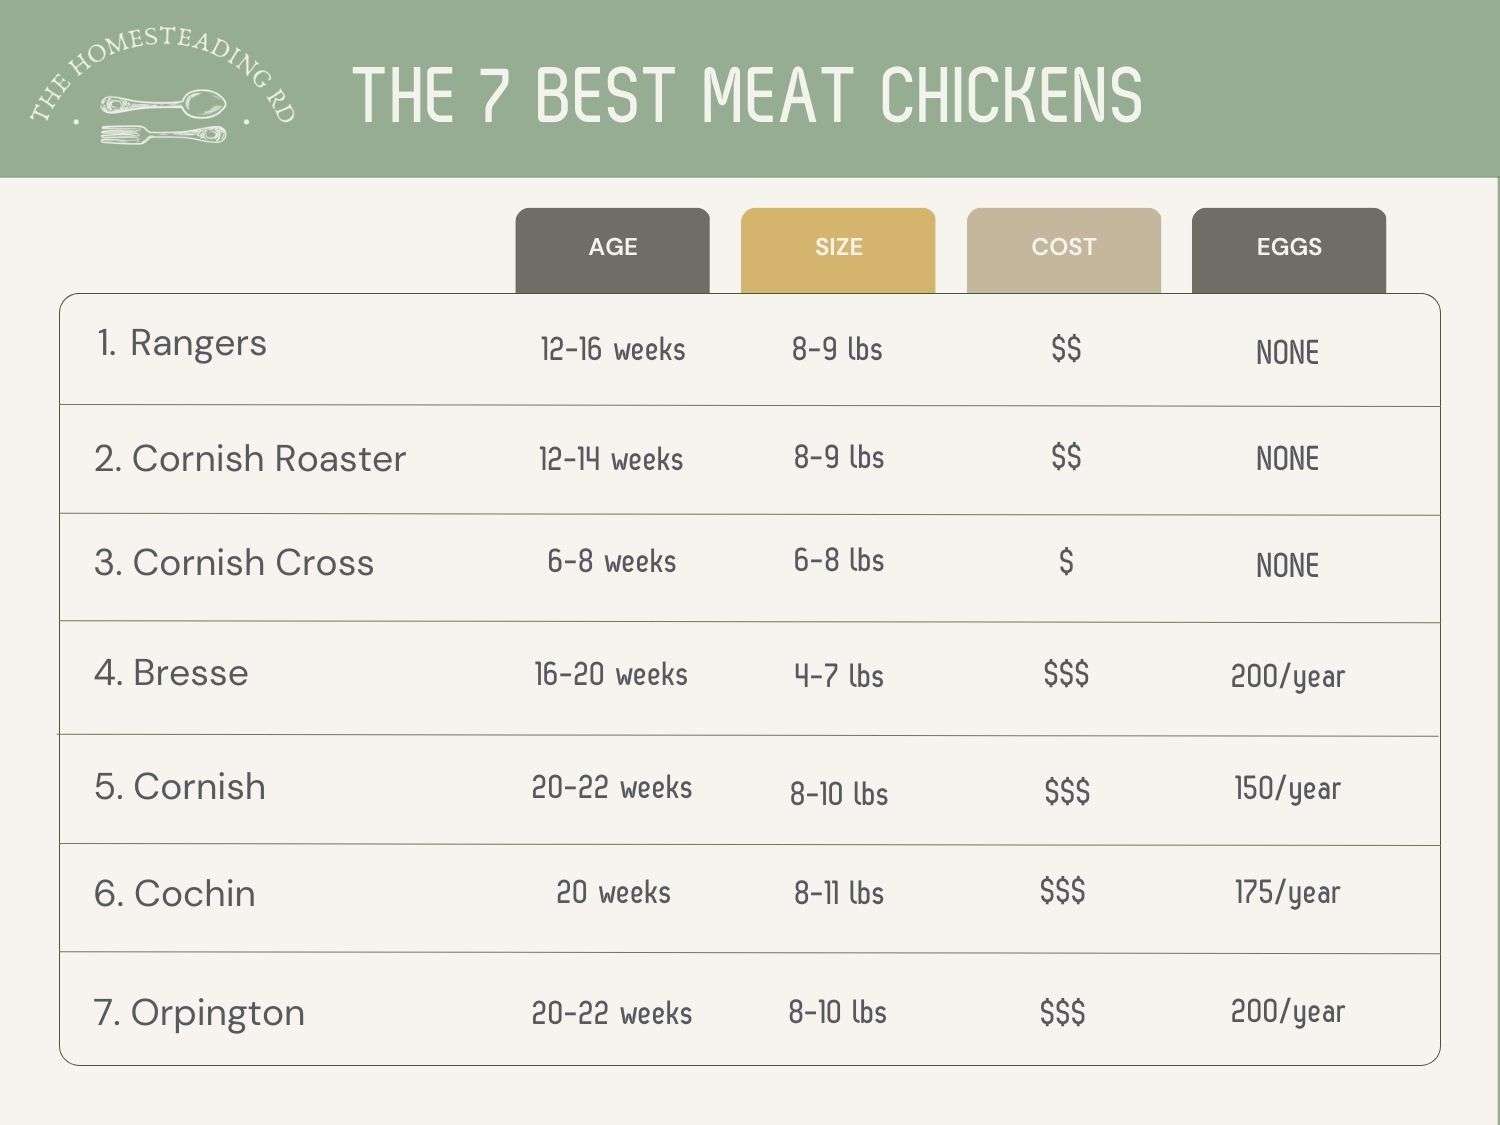 Table showing information about the best meat chicken breeds